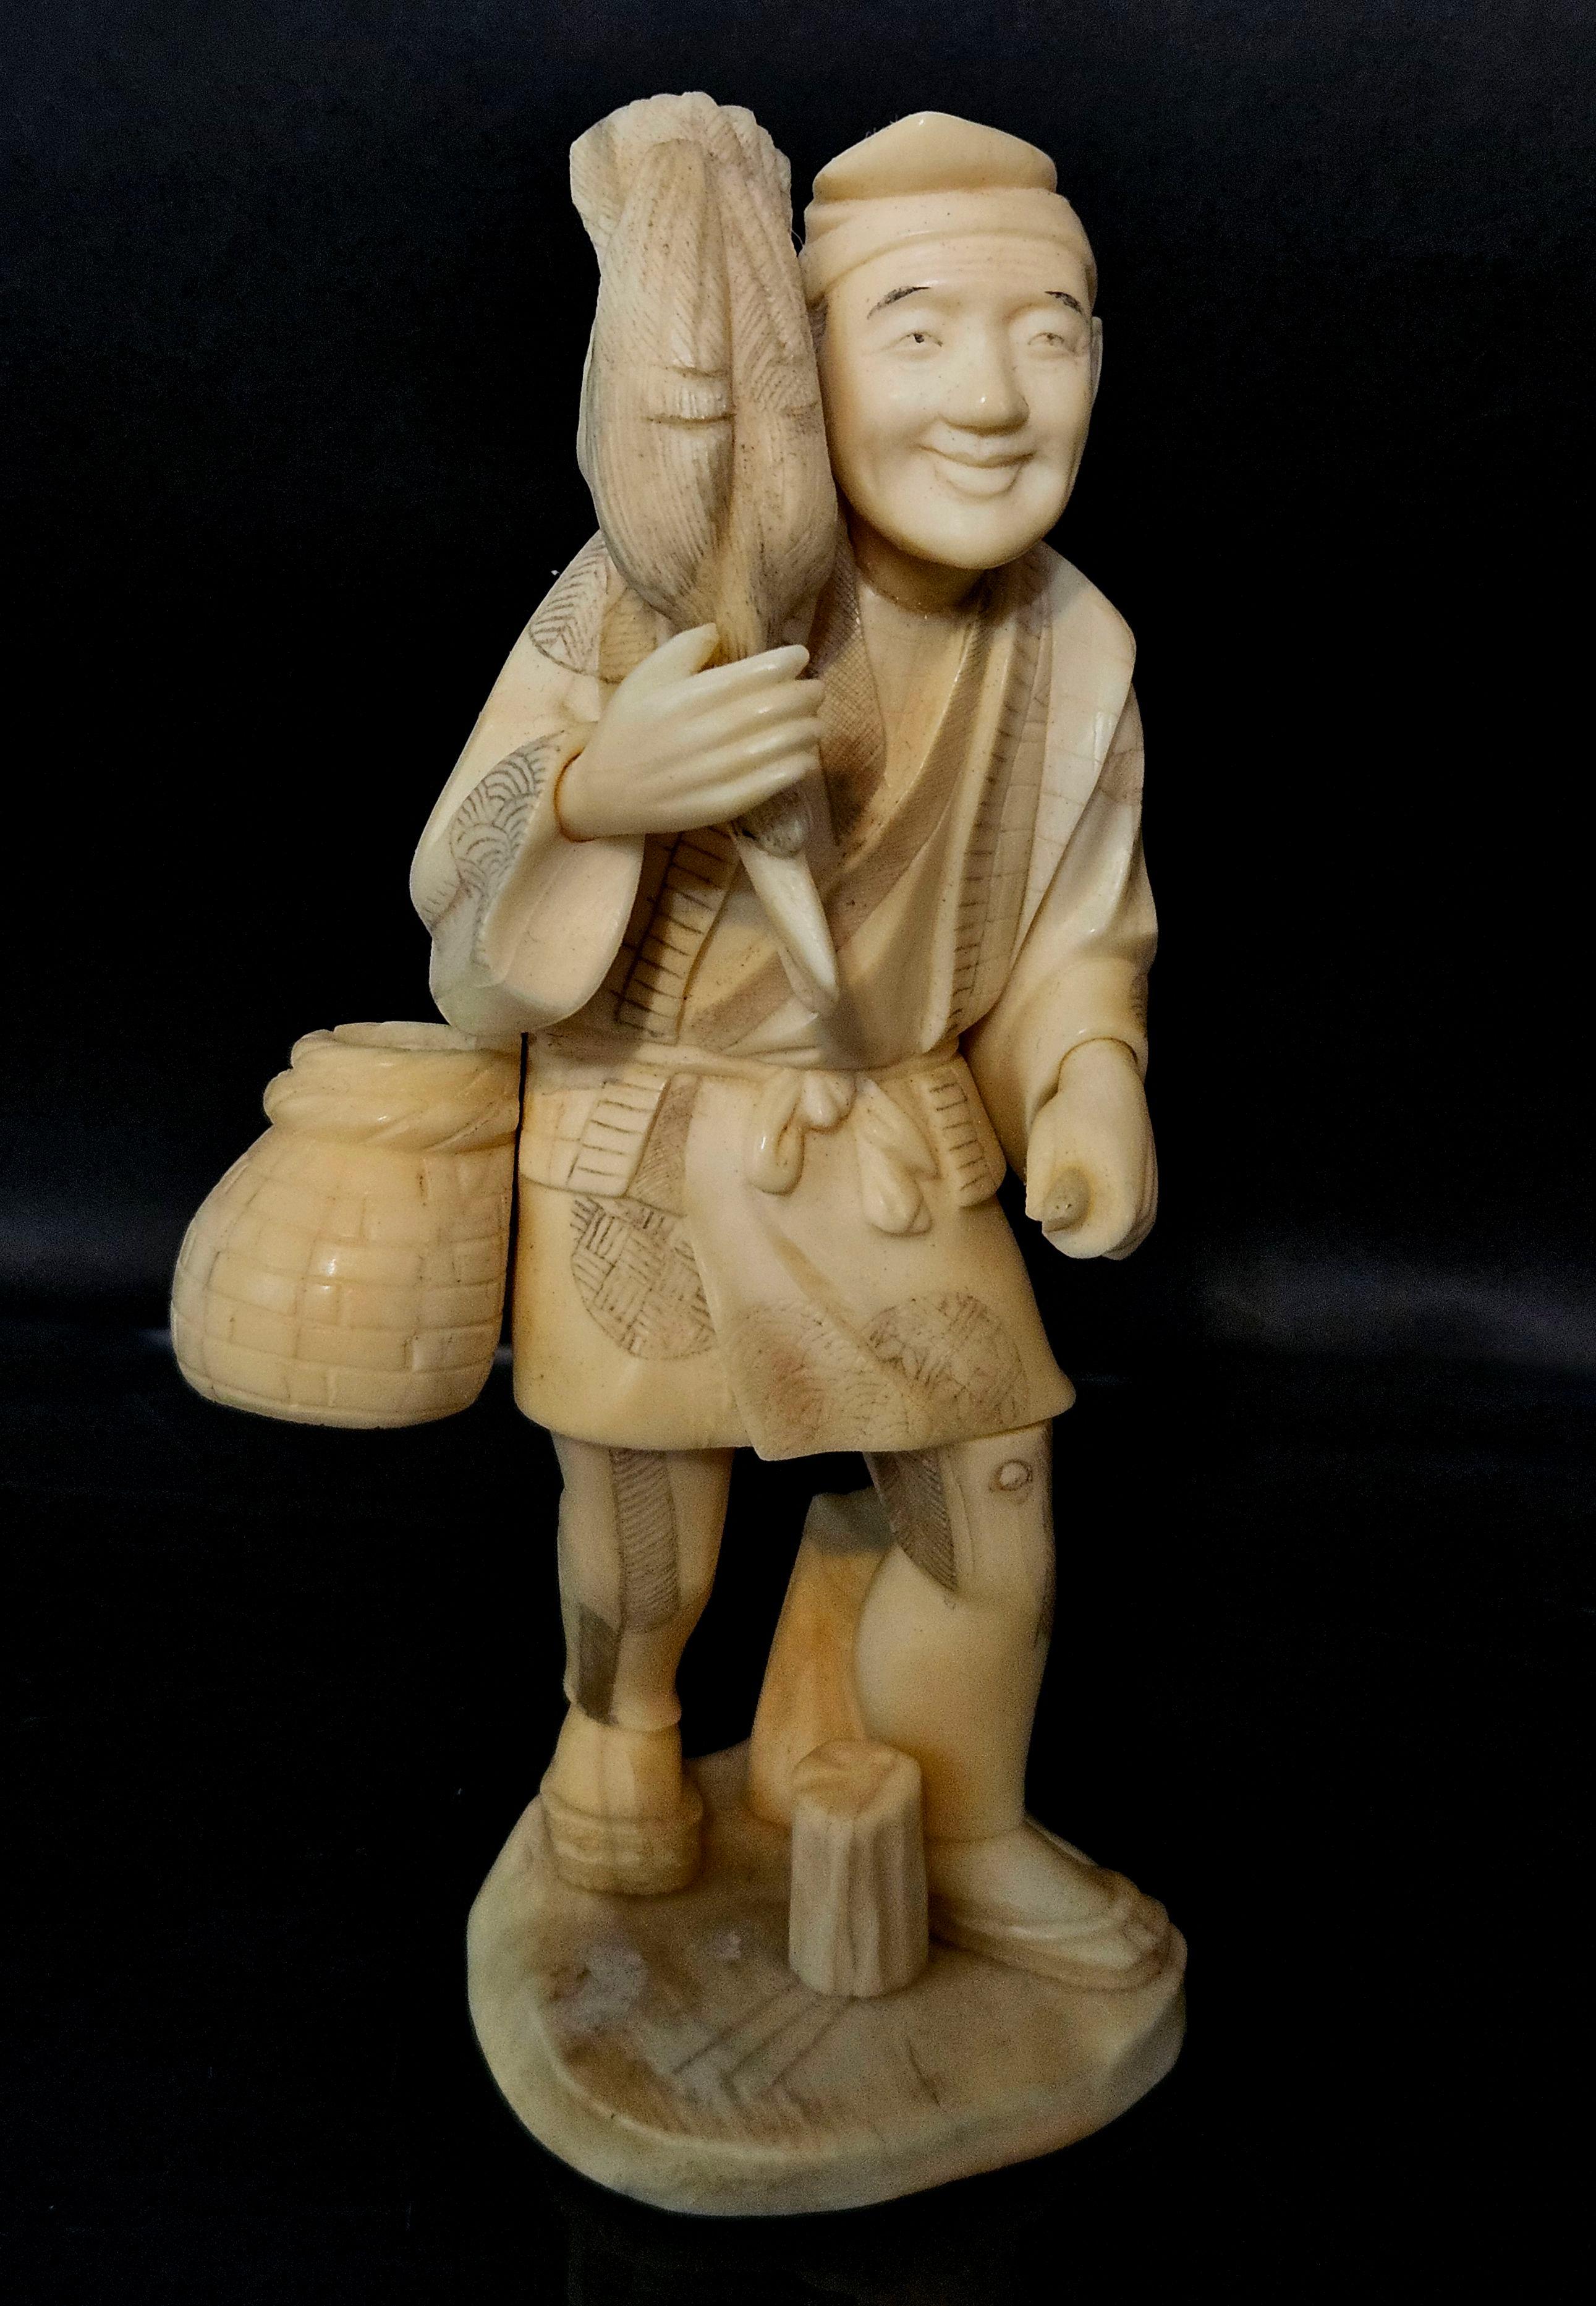 Japan, Meiji Period, a finely carved figurine with outstanding detail of a Goose and its Seller.
The man is carrying a goose on his right shoulder with a basket on the waist on the way to the market.
This caving style was trendy in Japan in the